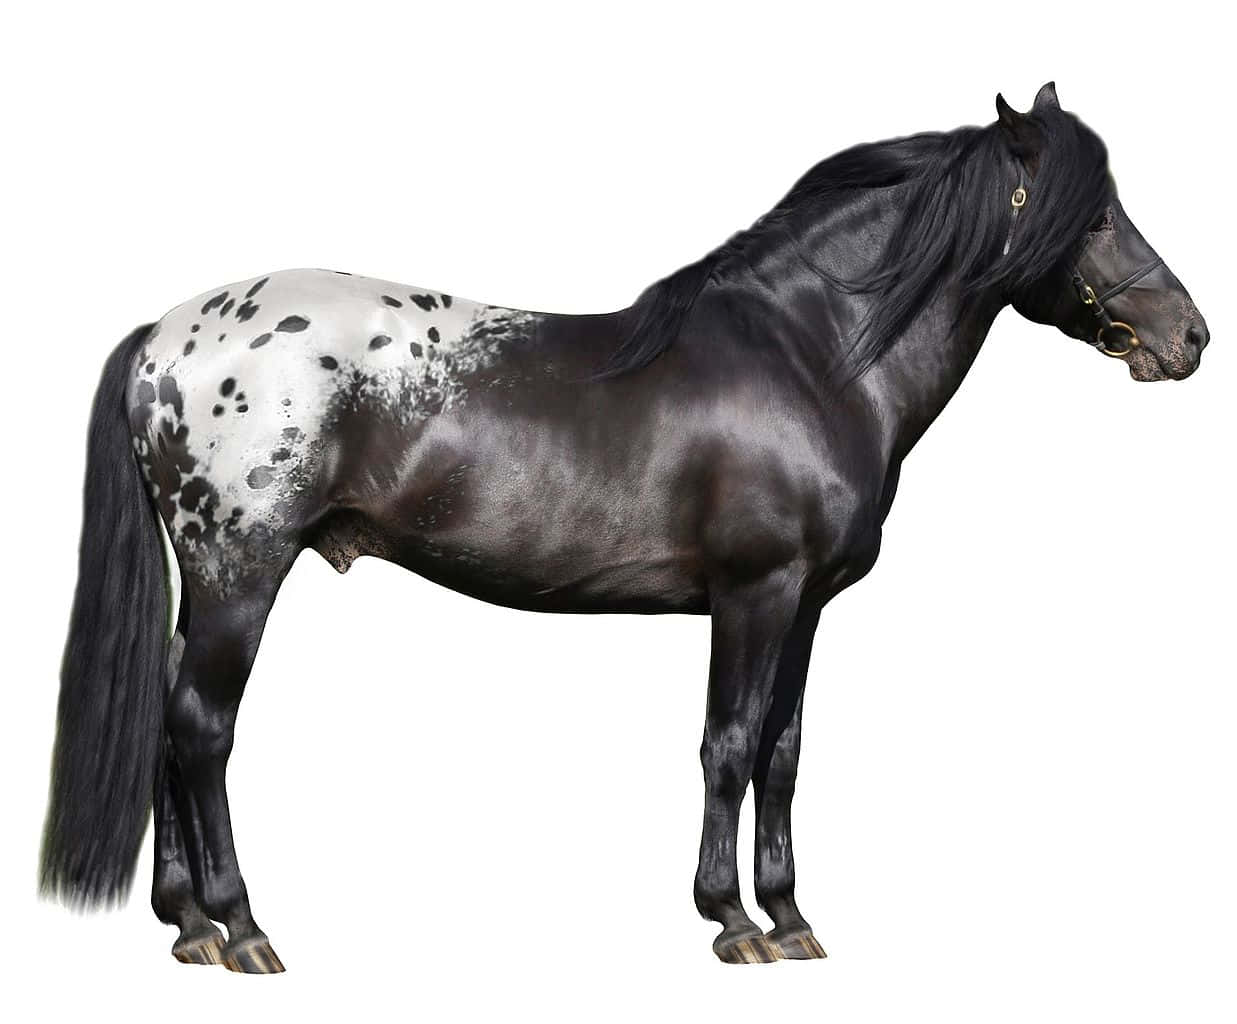 A Black And White Spotted Horse Standing On A White Background